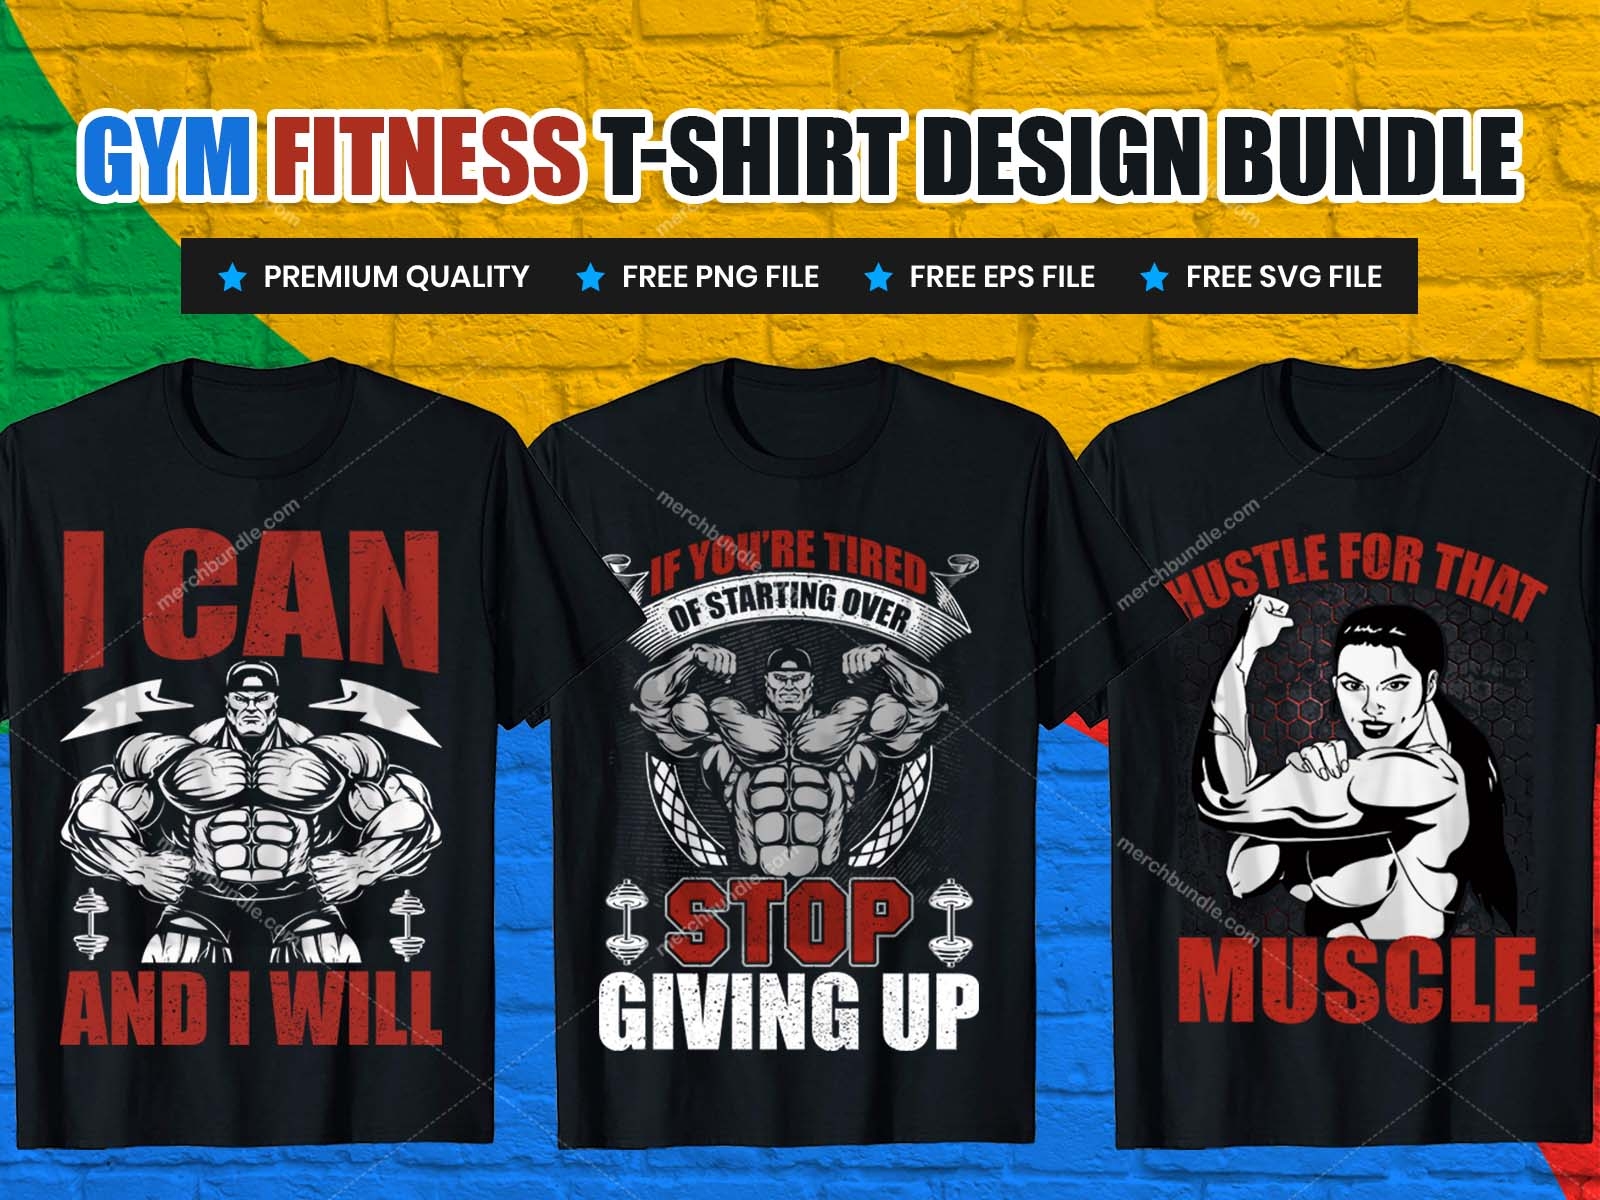 Best Gym Fitness TShirt Design Free Download. by Shohagh Hossen on